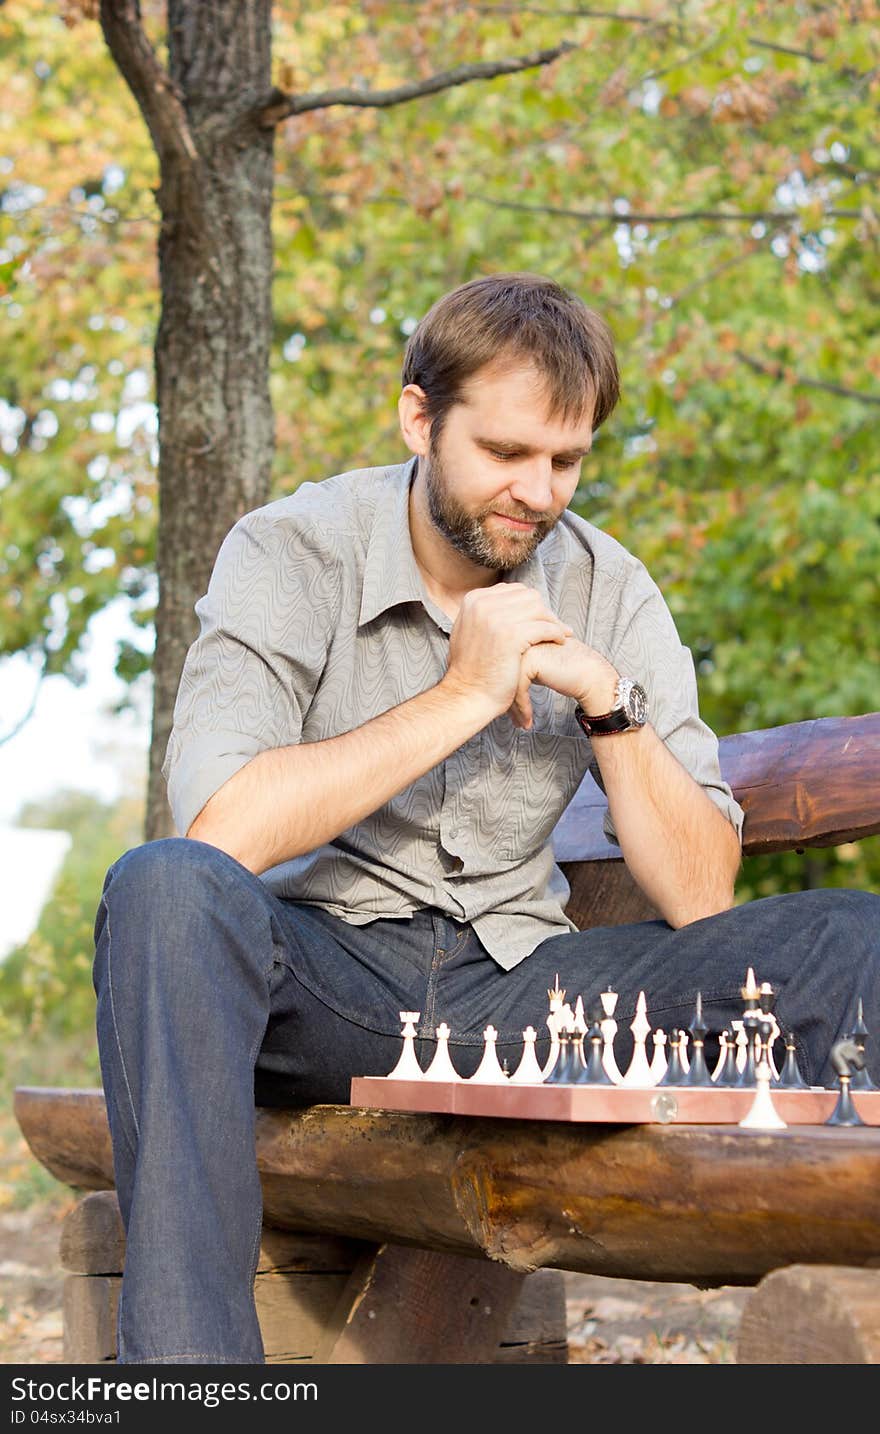 Low angle view ofa male chess player sitting on a wooden park bench contemplating the chessboard and working out his strategy. Low angle view ofa male chess player sitting on a wooden park bench contemplating the chessboard and working out his strategy